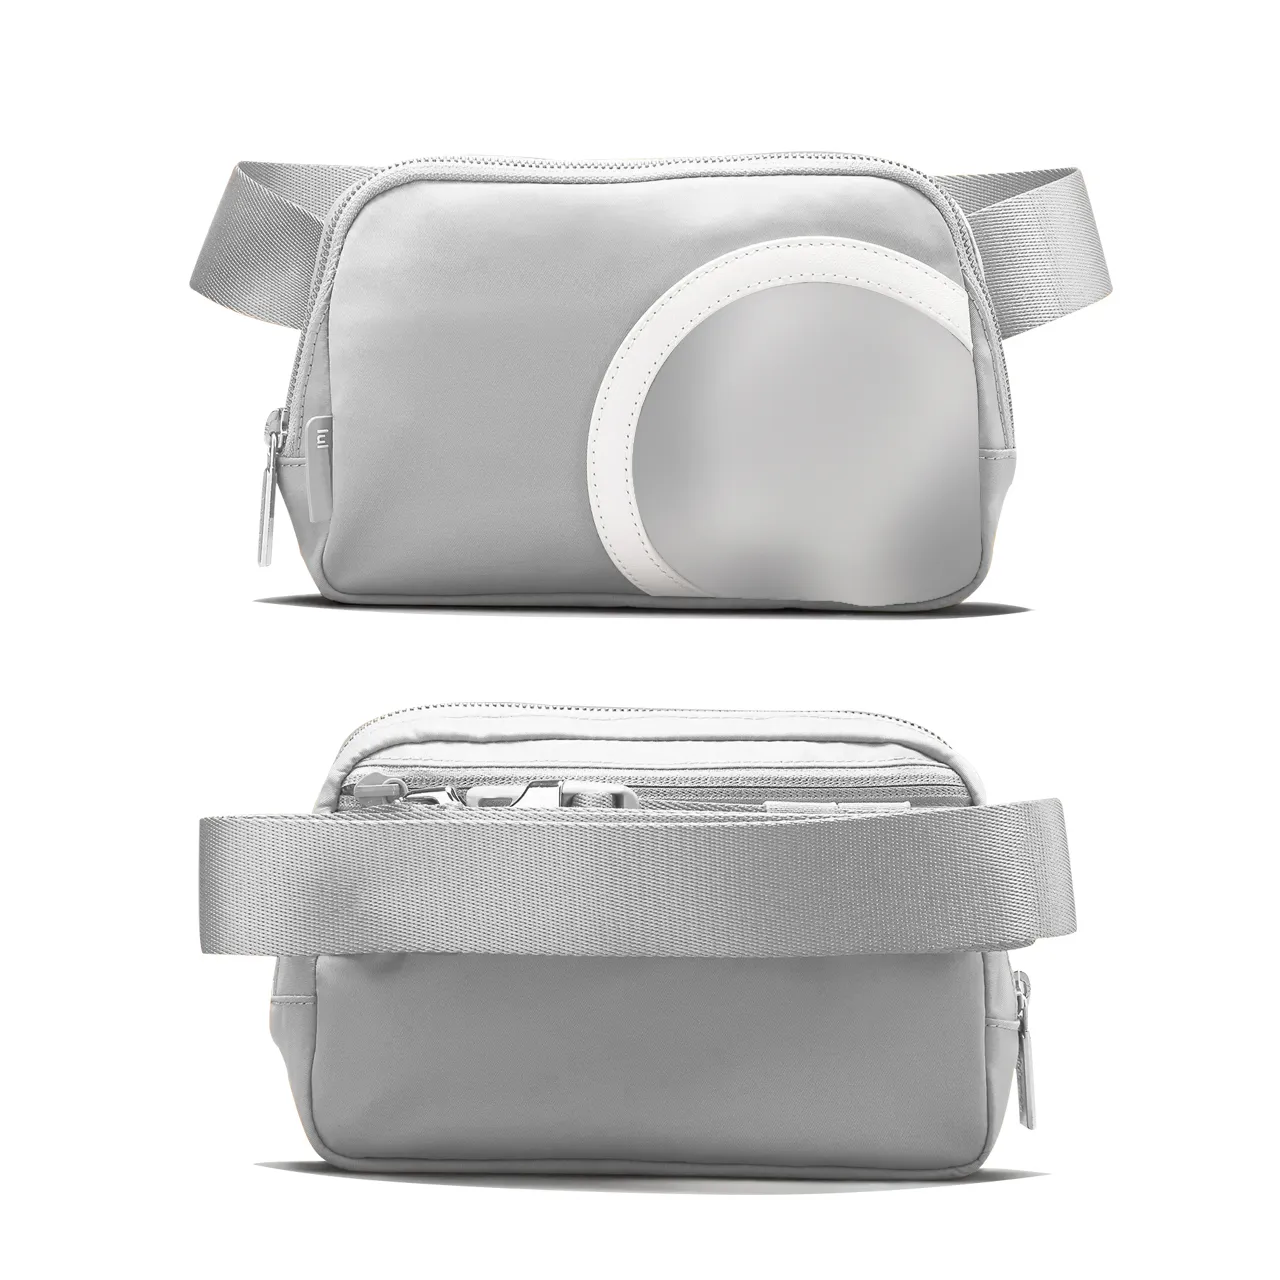 Luxury Designer Fleece Everywhere Belt Bag 2l For Women Large Size, Ideal  For Yoga, Travel And Everyday Use From Akend, $11.85